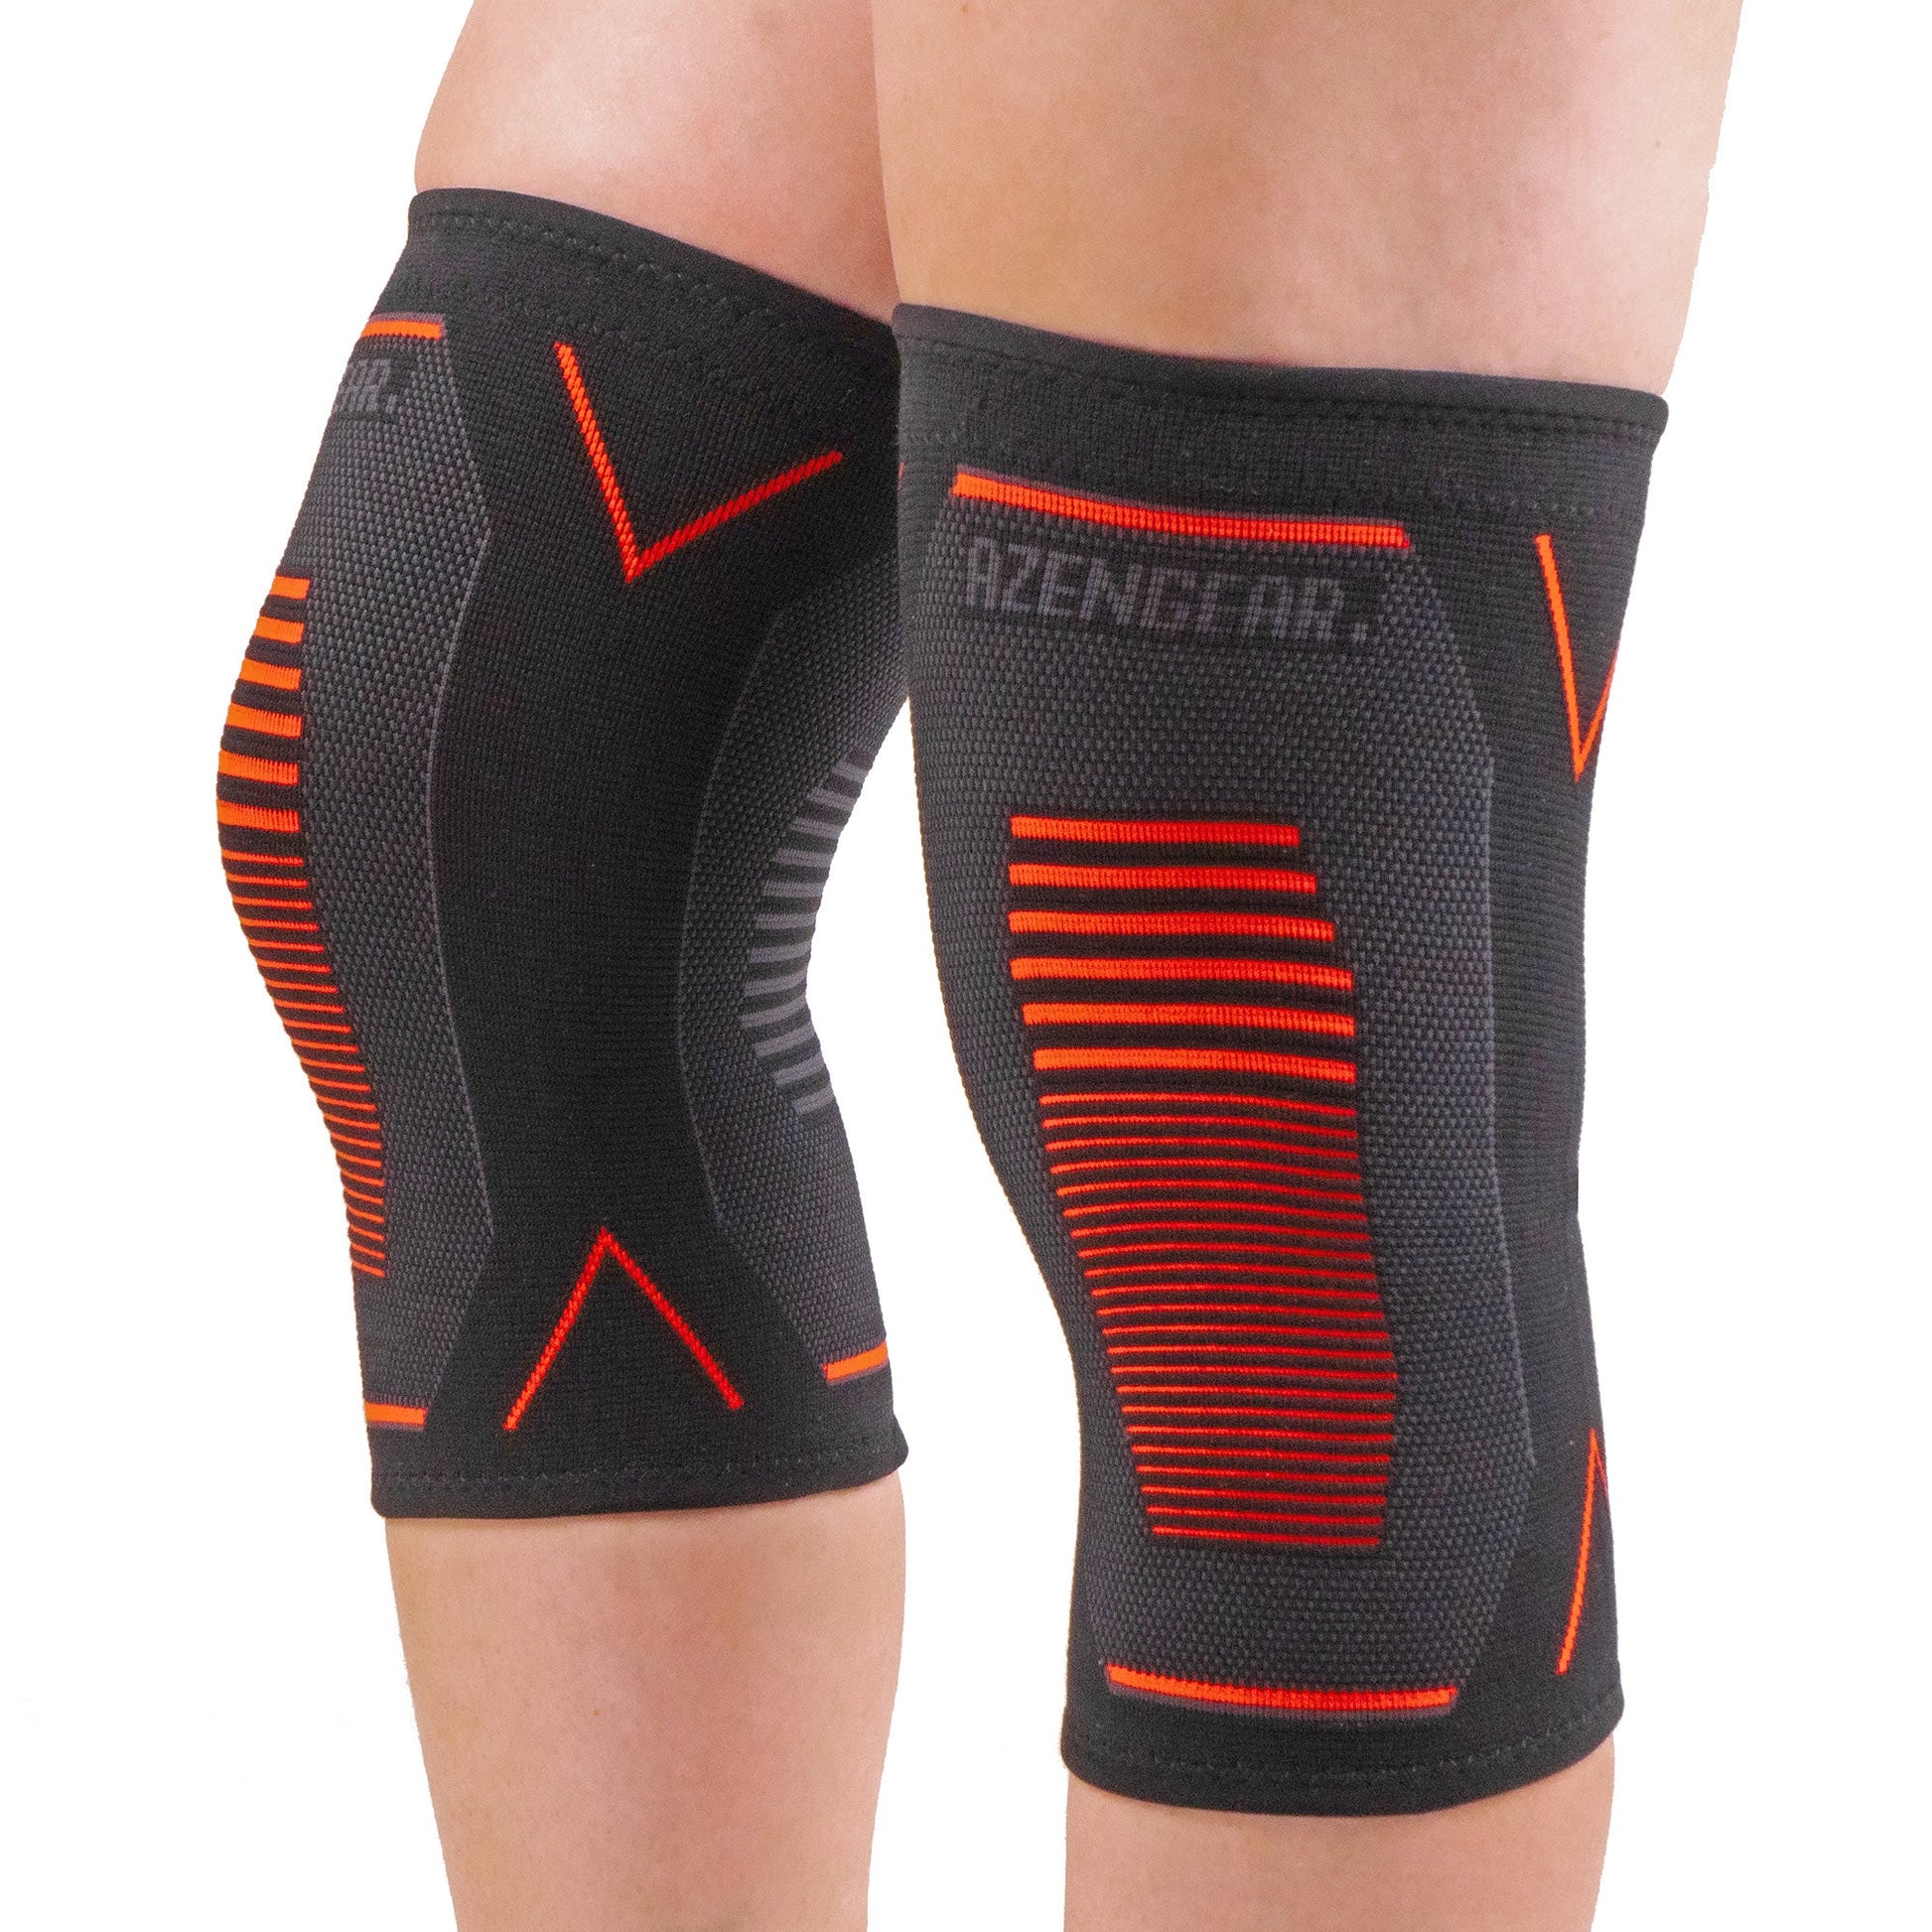 Knee Compression Support Brace (Pair)